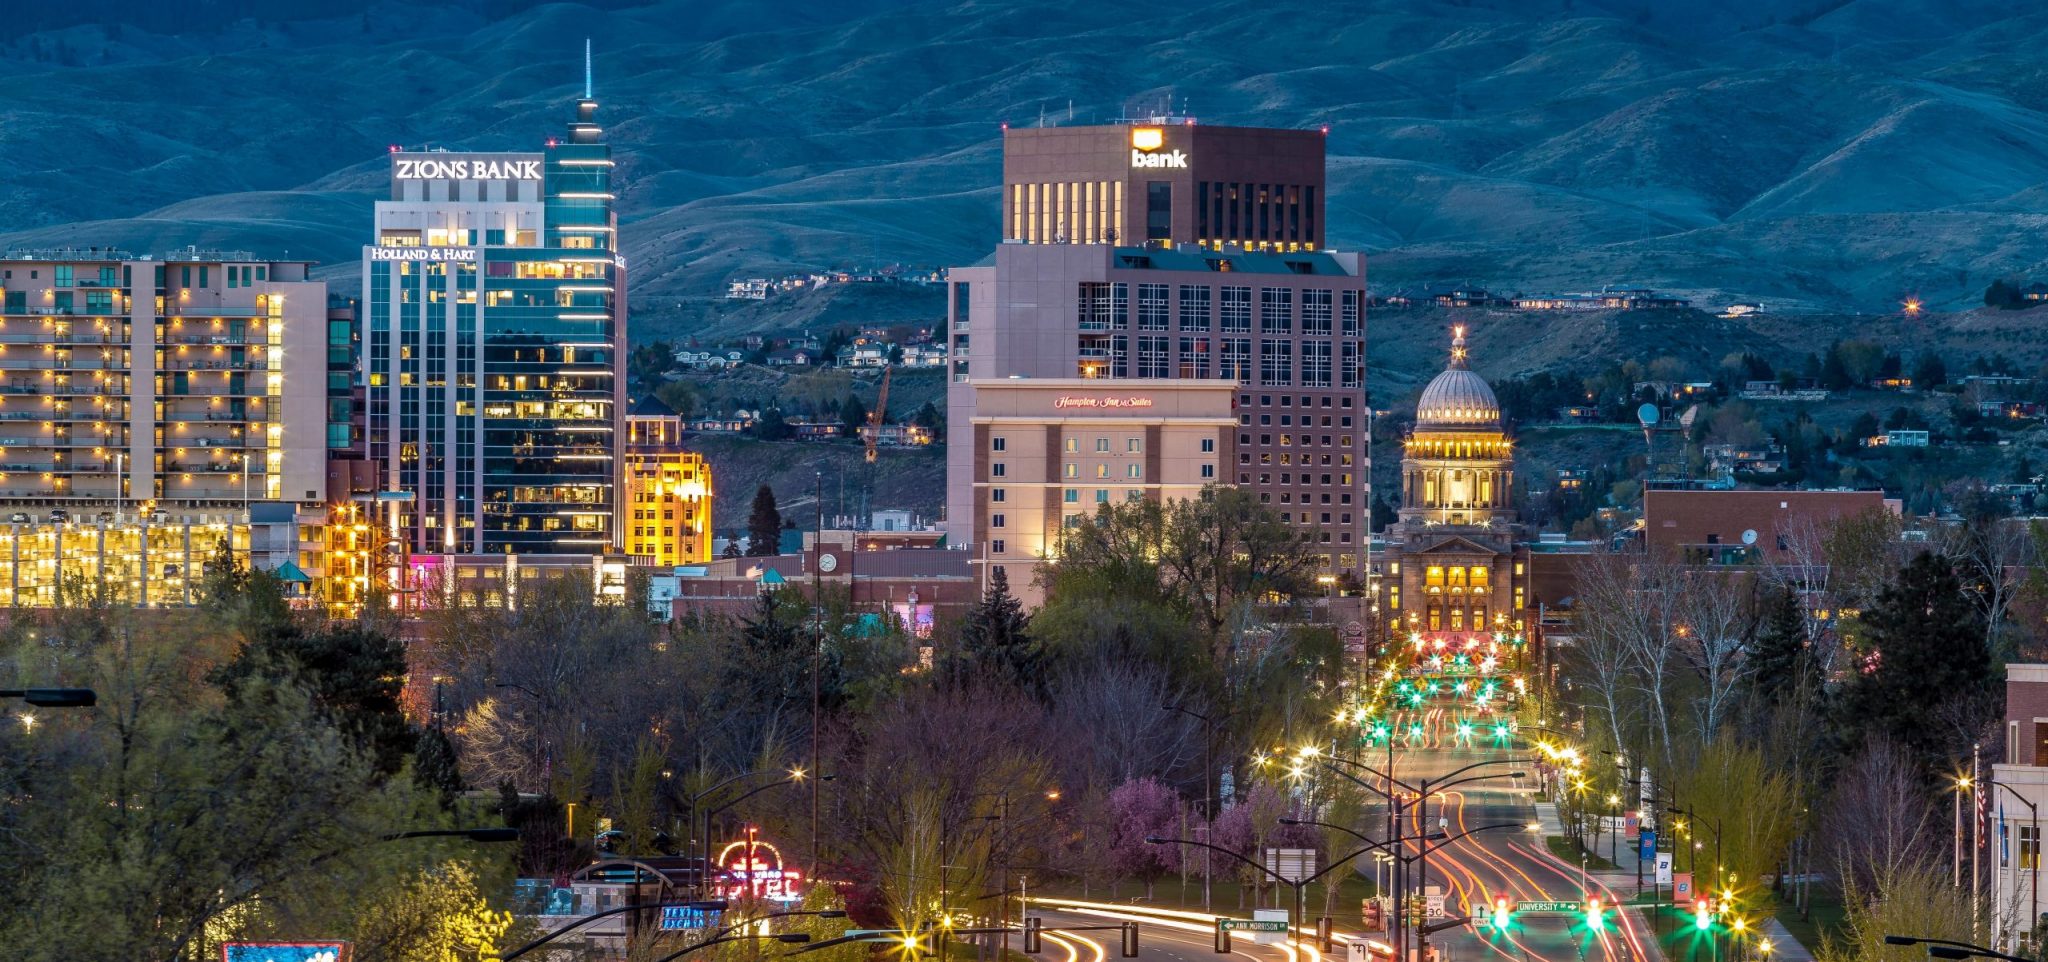 This photo depicts downtown Boise, Idaho, which is where RSG conducted the 2021 Treasure Valley Travel Survey.